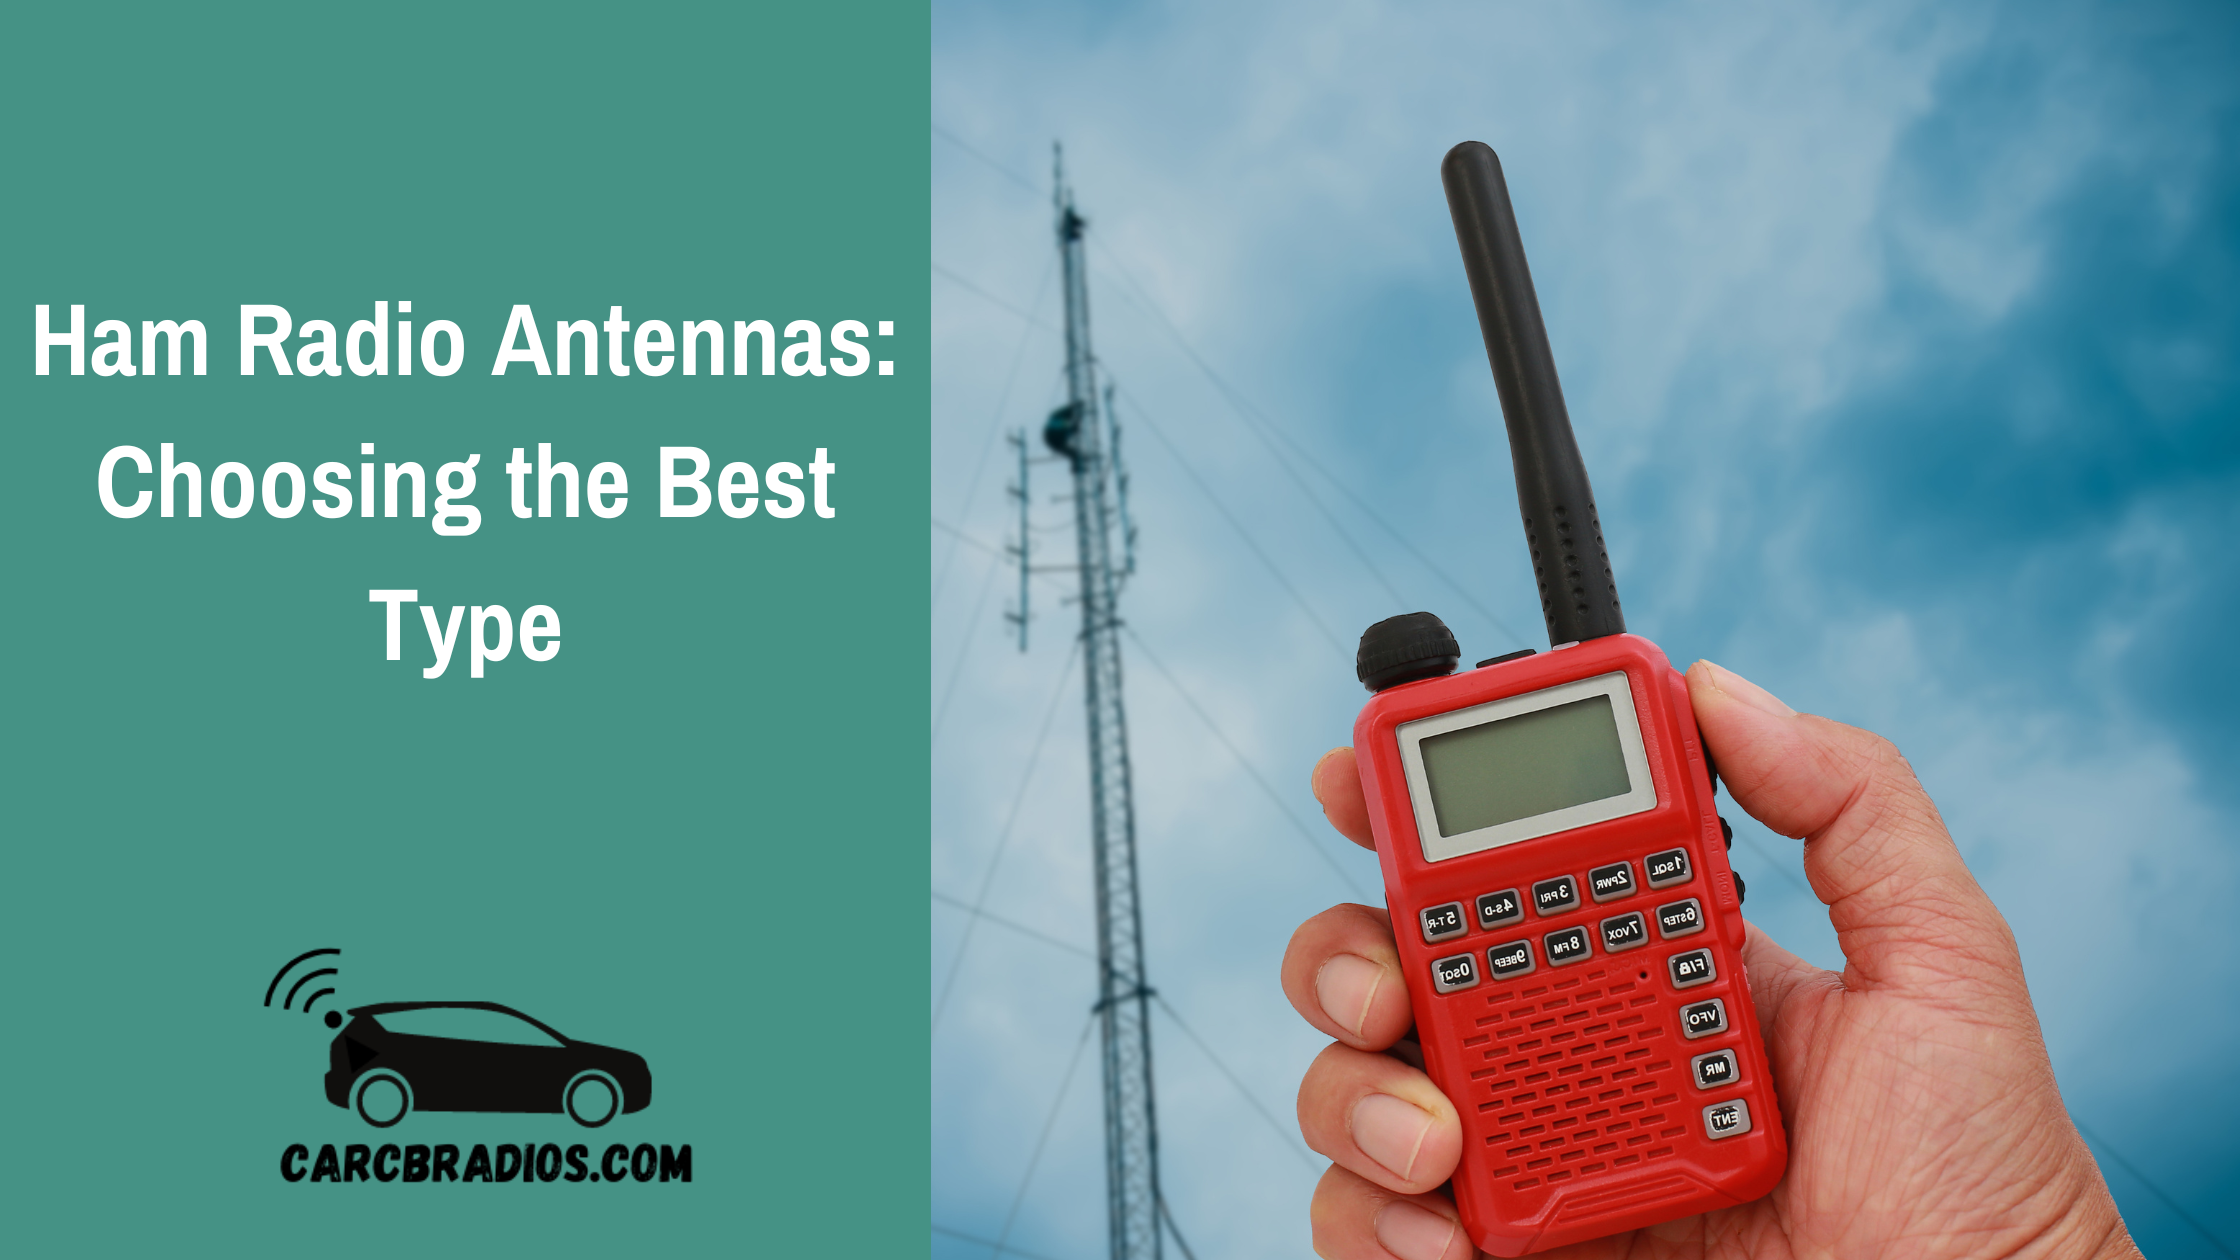 Mobile antennas, antennas for handheld radios, and base station antennas are just a few of the options available. By understanding the benefits and limitations of each type, you can make an informed decision and get the most out of your radio. Be creative and explore your options to find the perfect antenna for your needs.